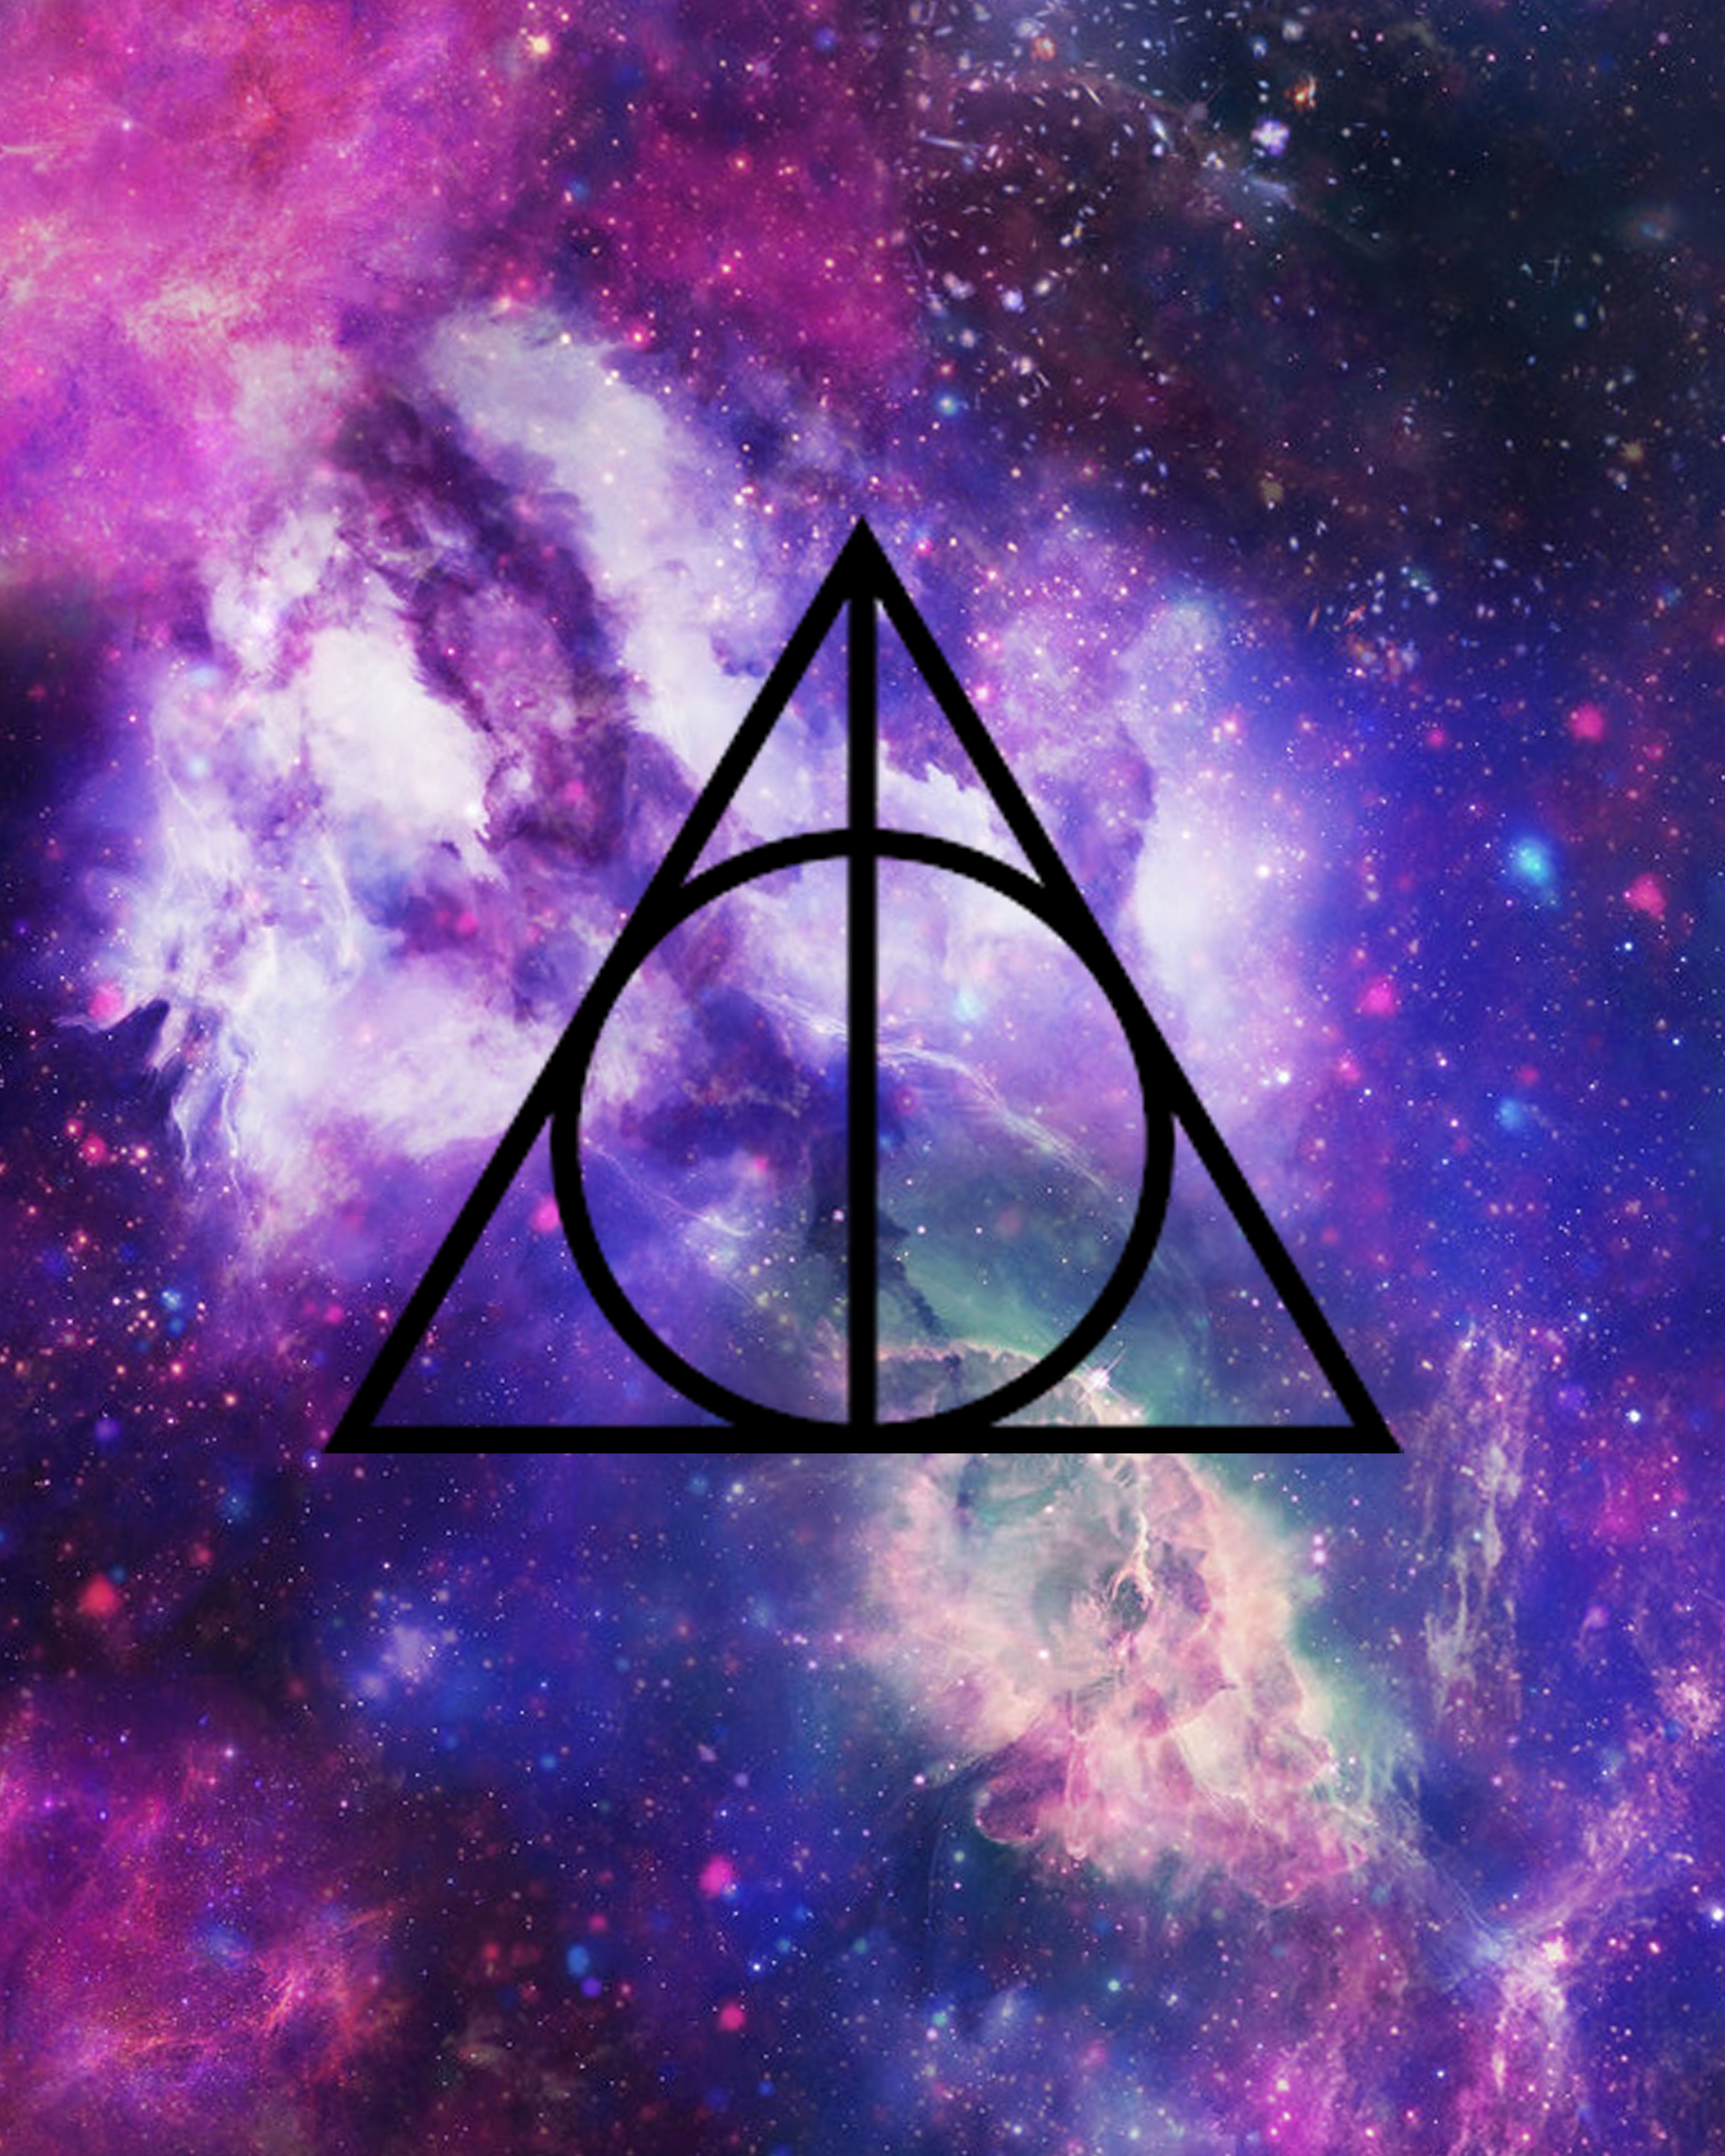 Galaxy Harry Potter Deathly Hallows Symbol , HD Wallpaper & Backgrounds